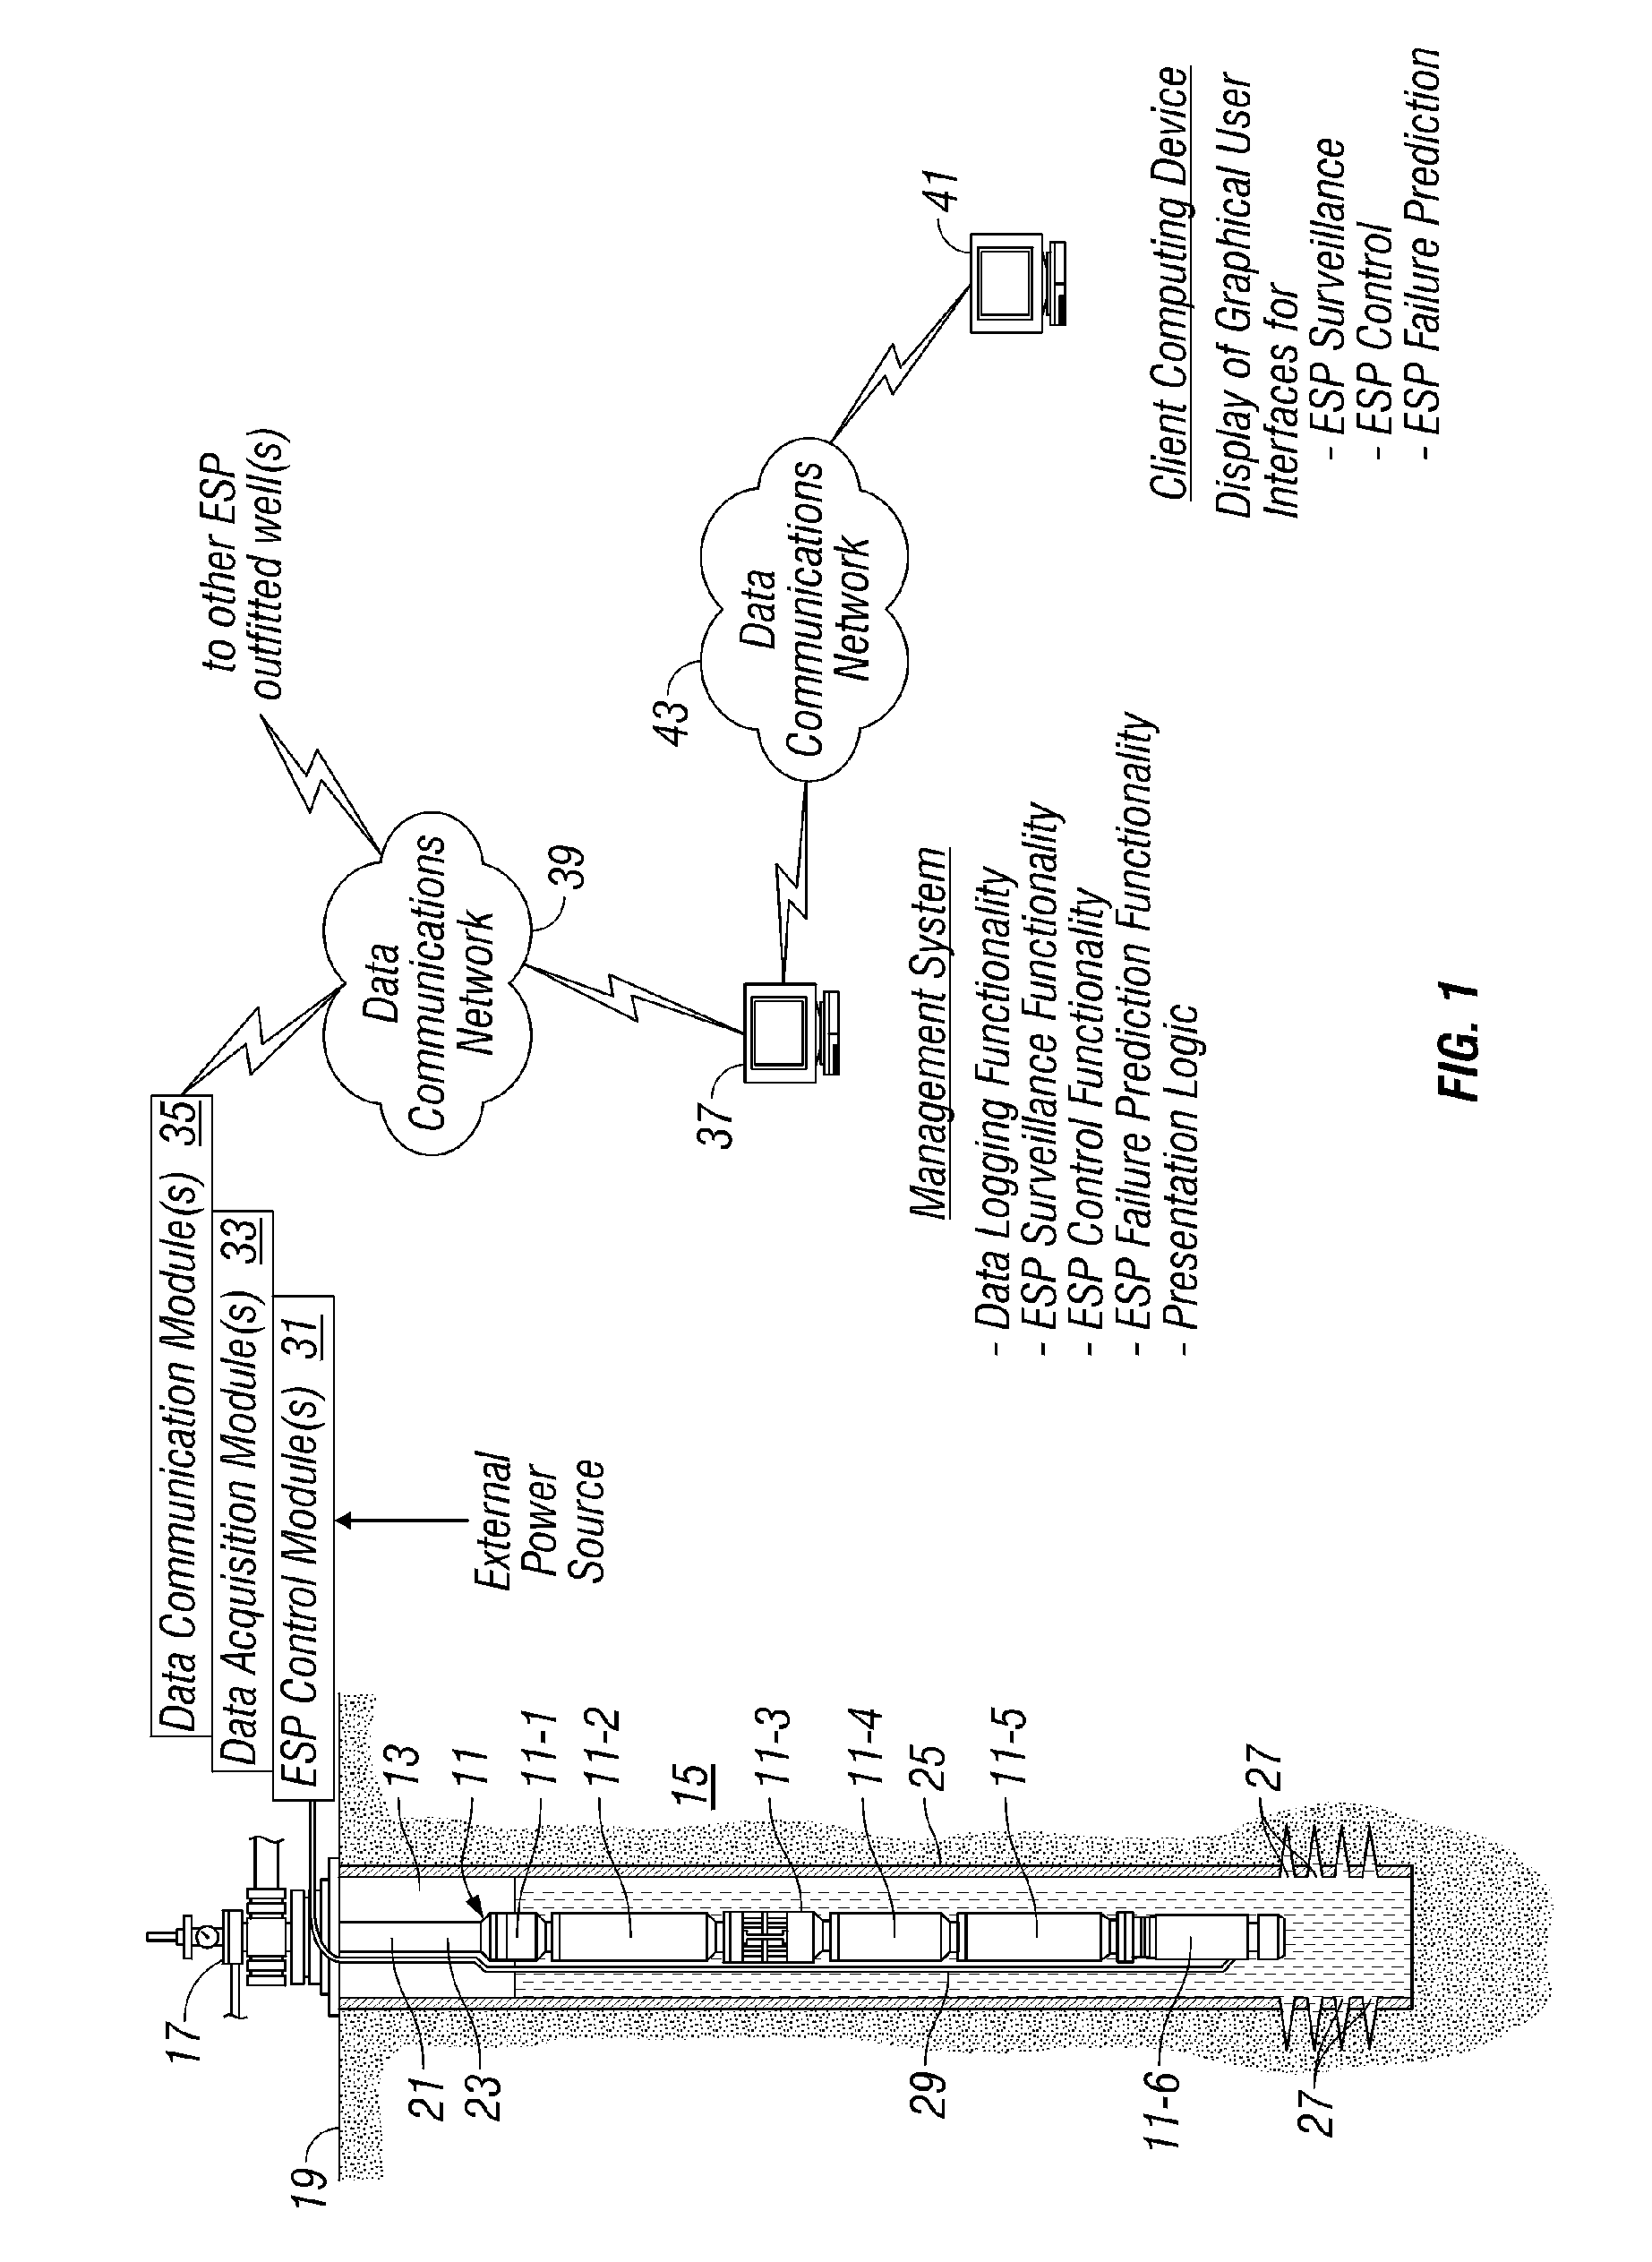 System and method for real-time monitoring and failure prediction of electrical submersible pumps